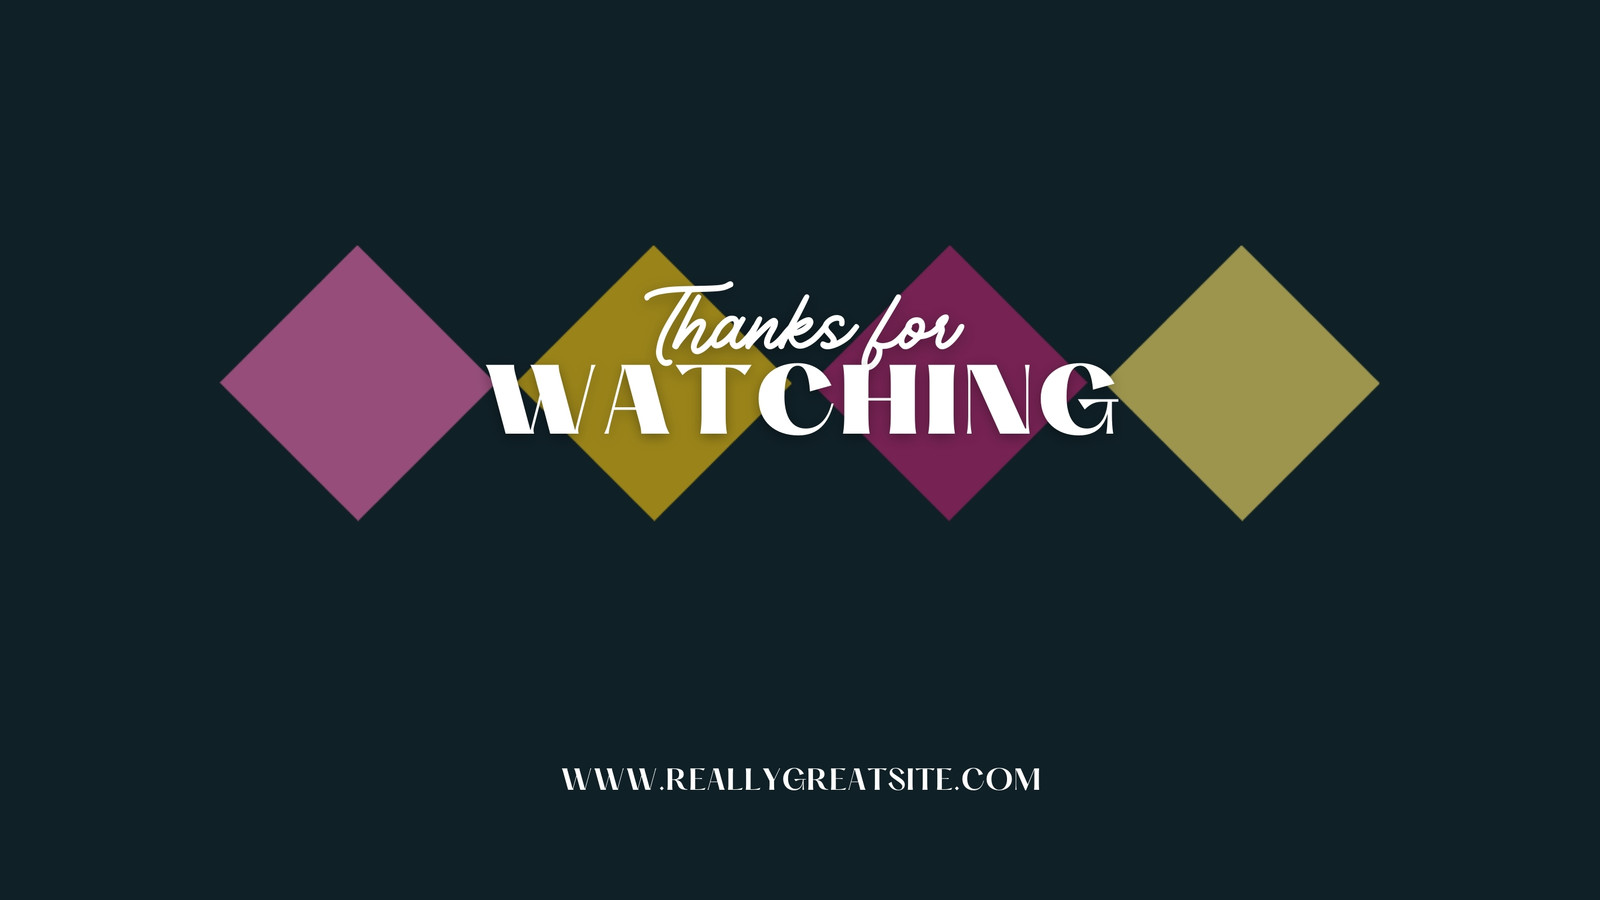 Free Thanks for Watching video templates to customize | Canva